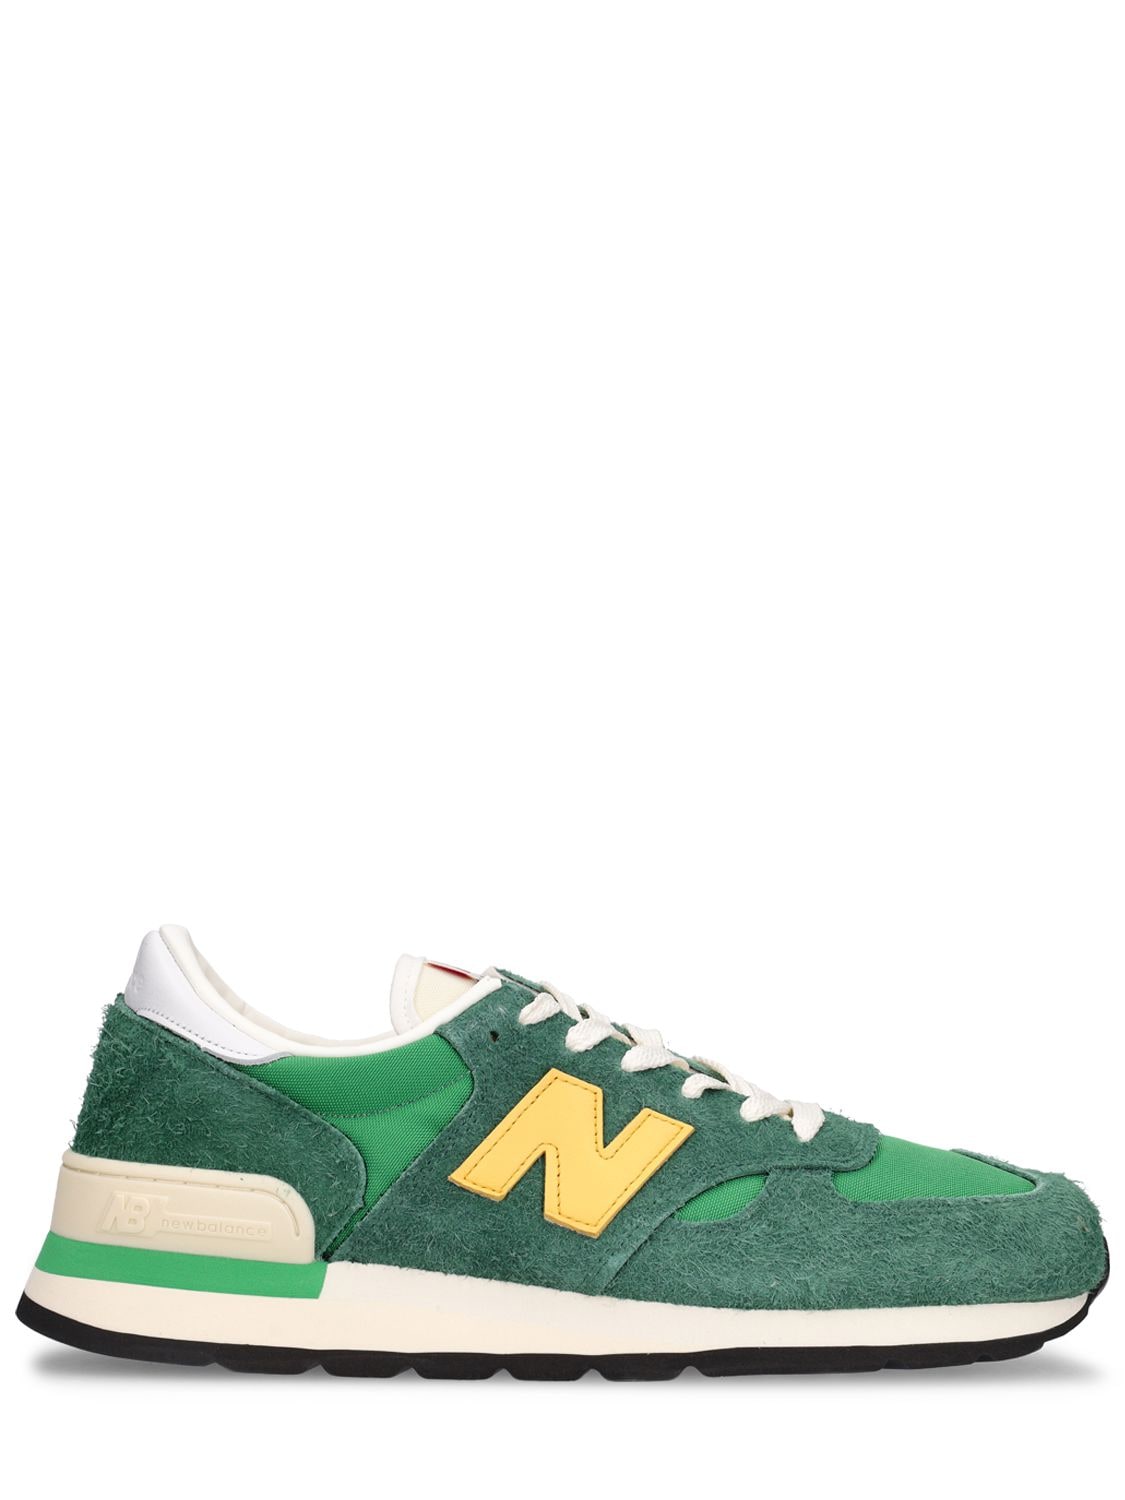 NEW BALANCE 990 V1 SNEAKERS